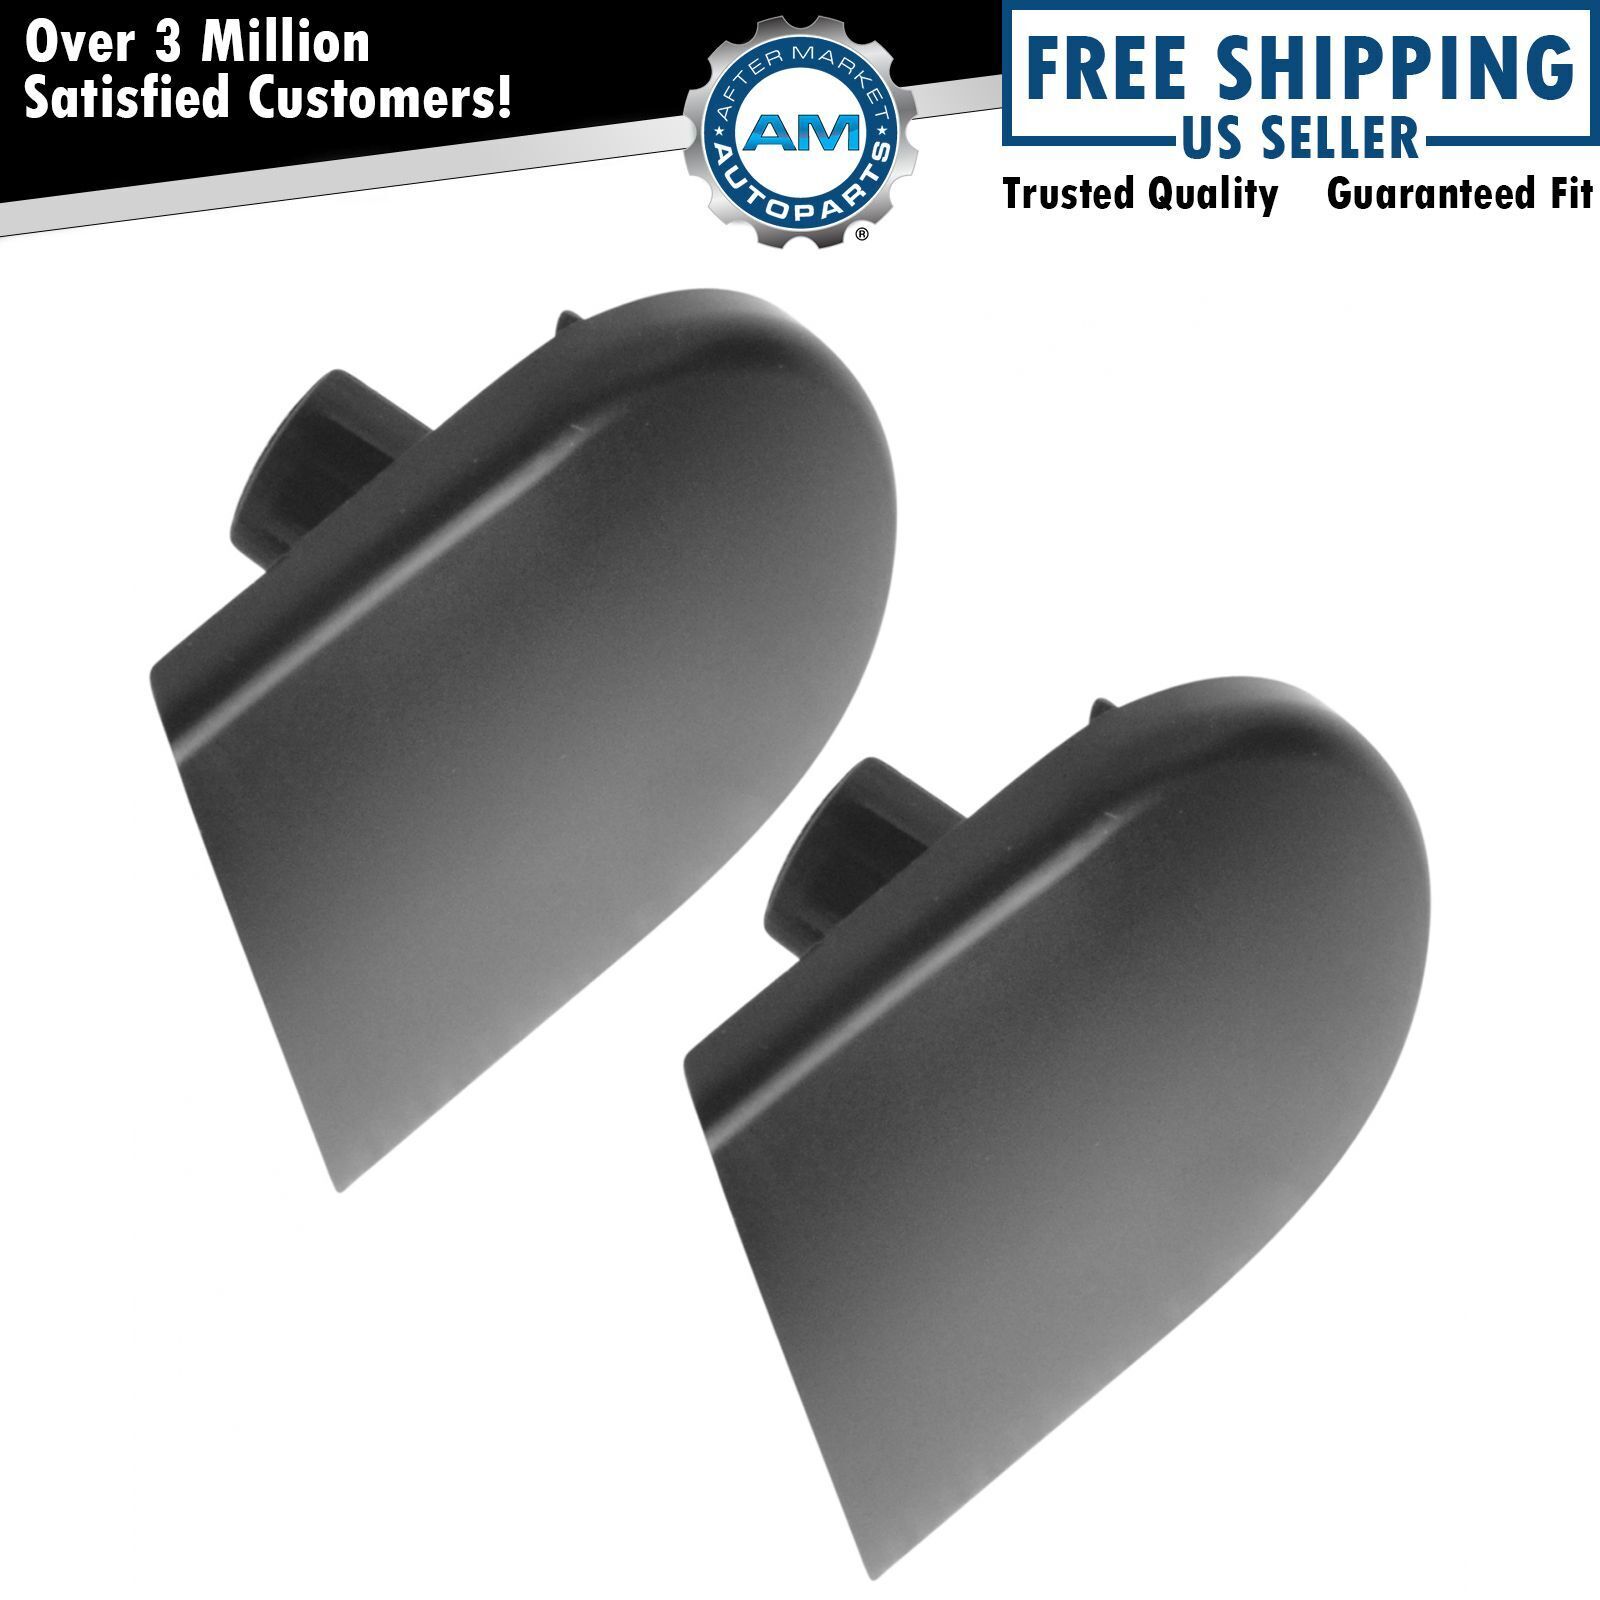 OEM 22793593 Windshield Wiper Arm Nut Cap Front Left & Right Side Pair for GM